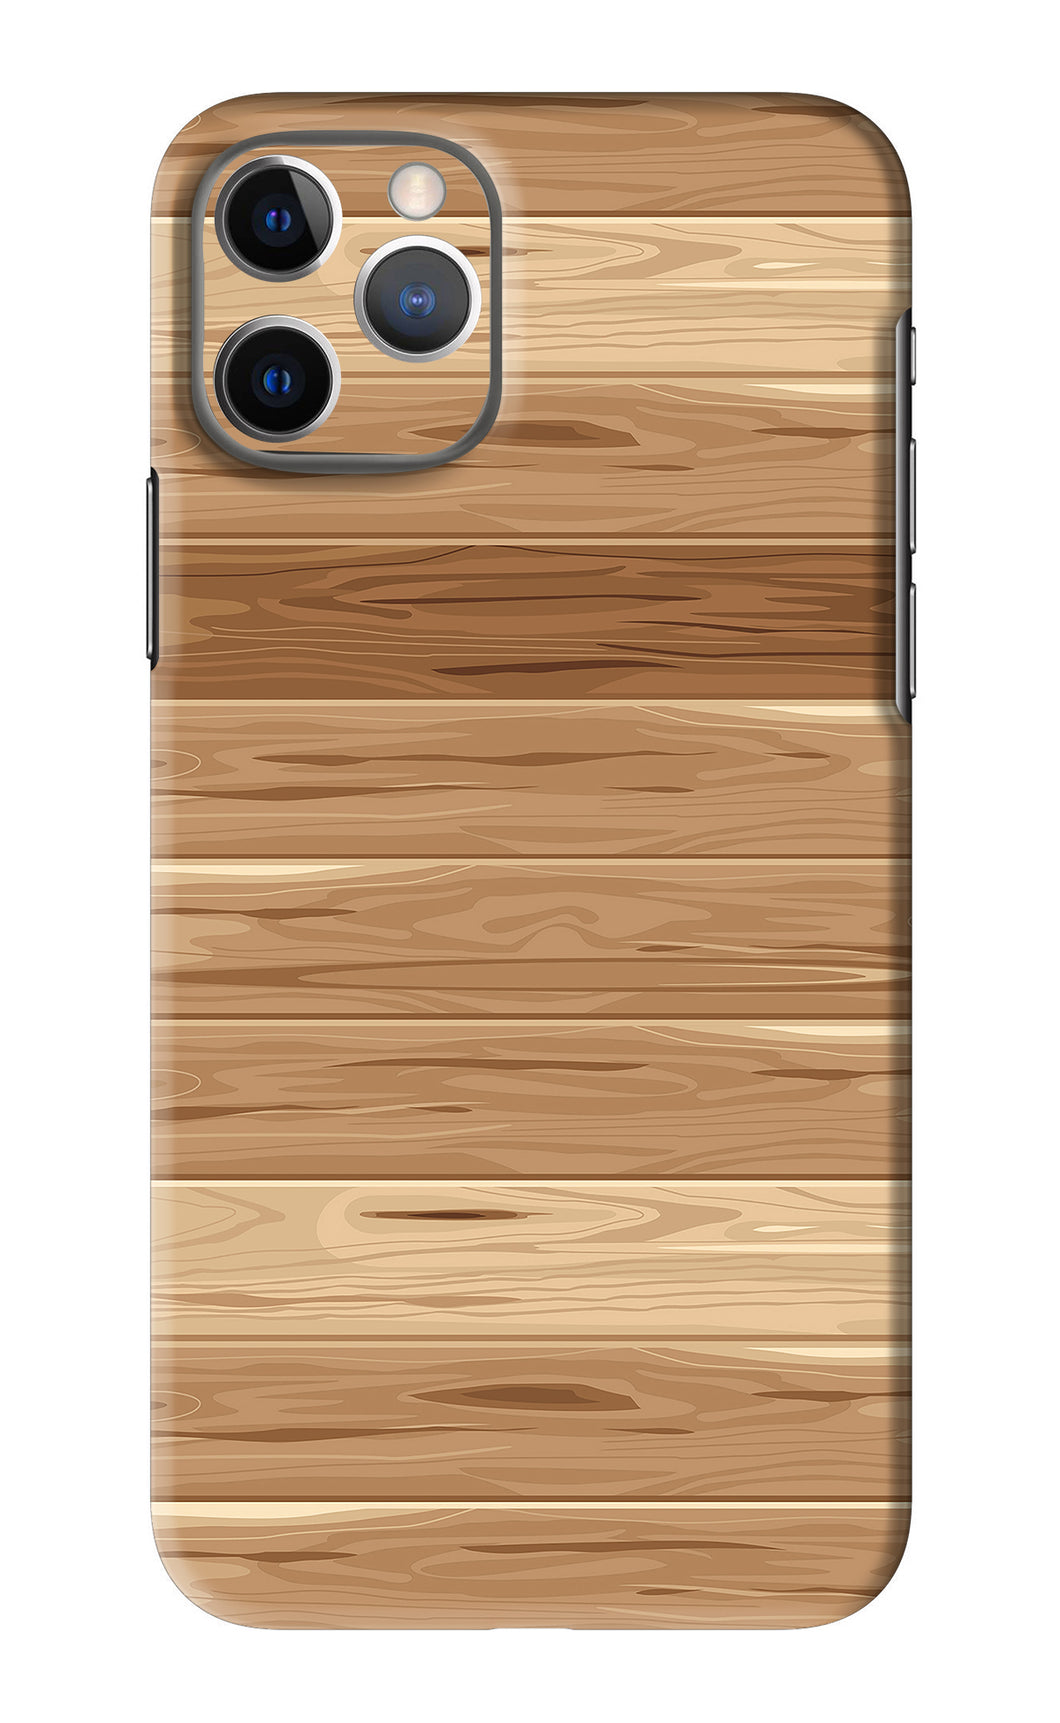 Wooden Vector iPhone 11 Pro Max Back Skin Wrap